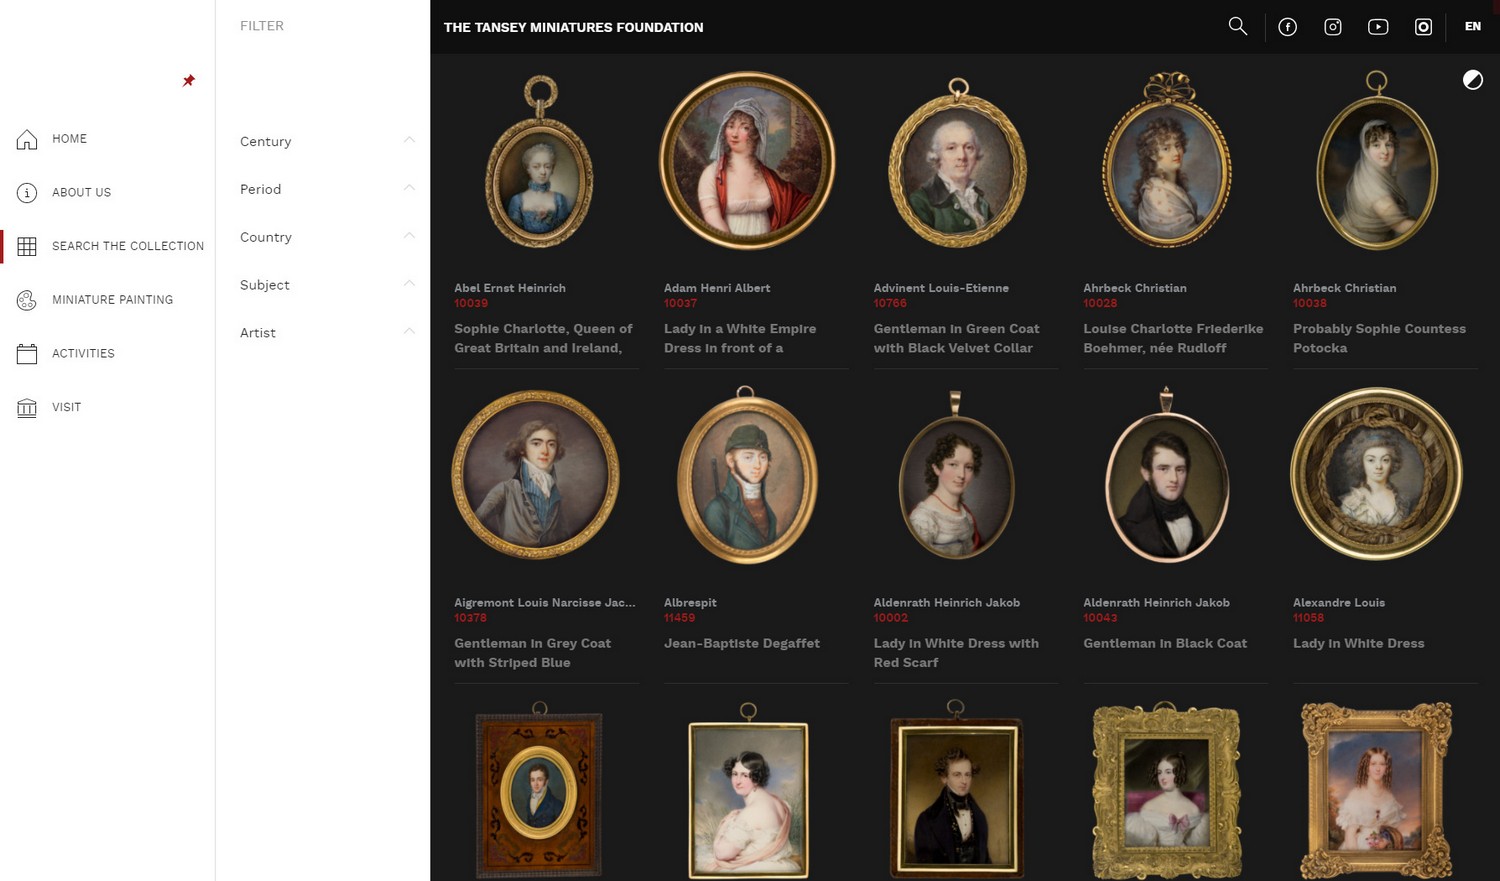 The Tansey Miniatures Foundation Website